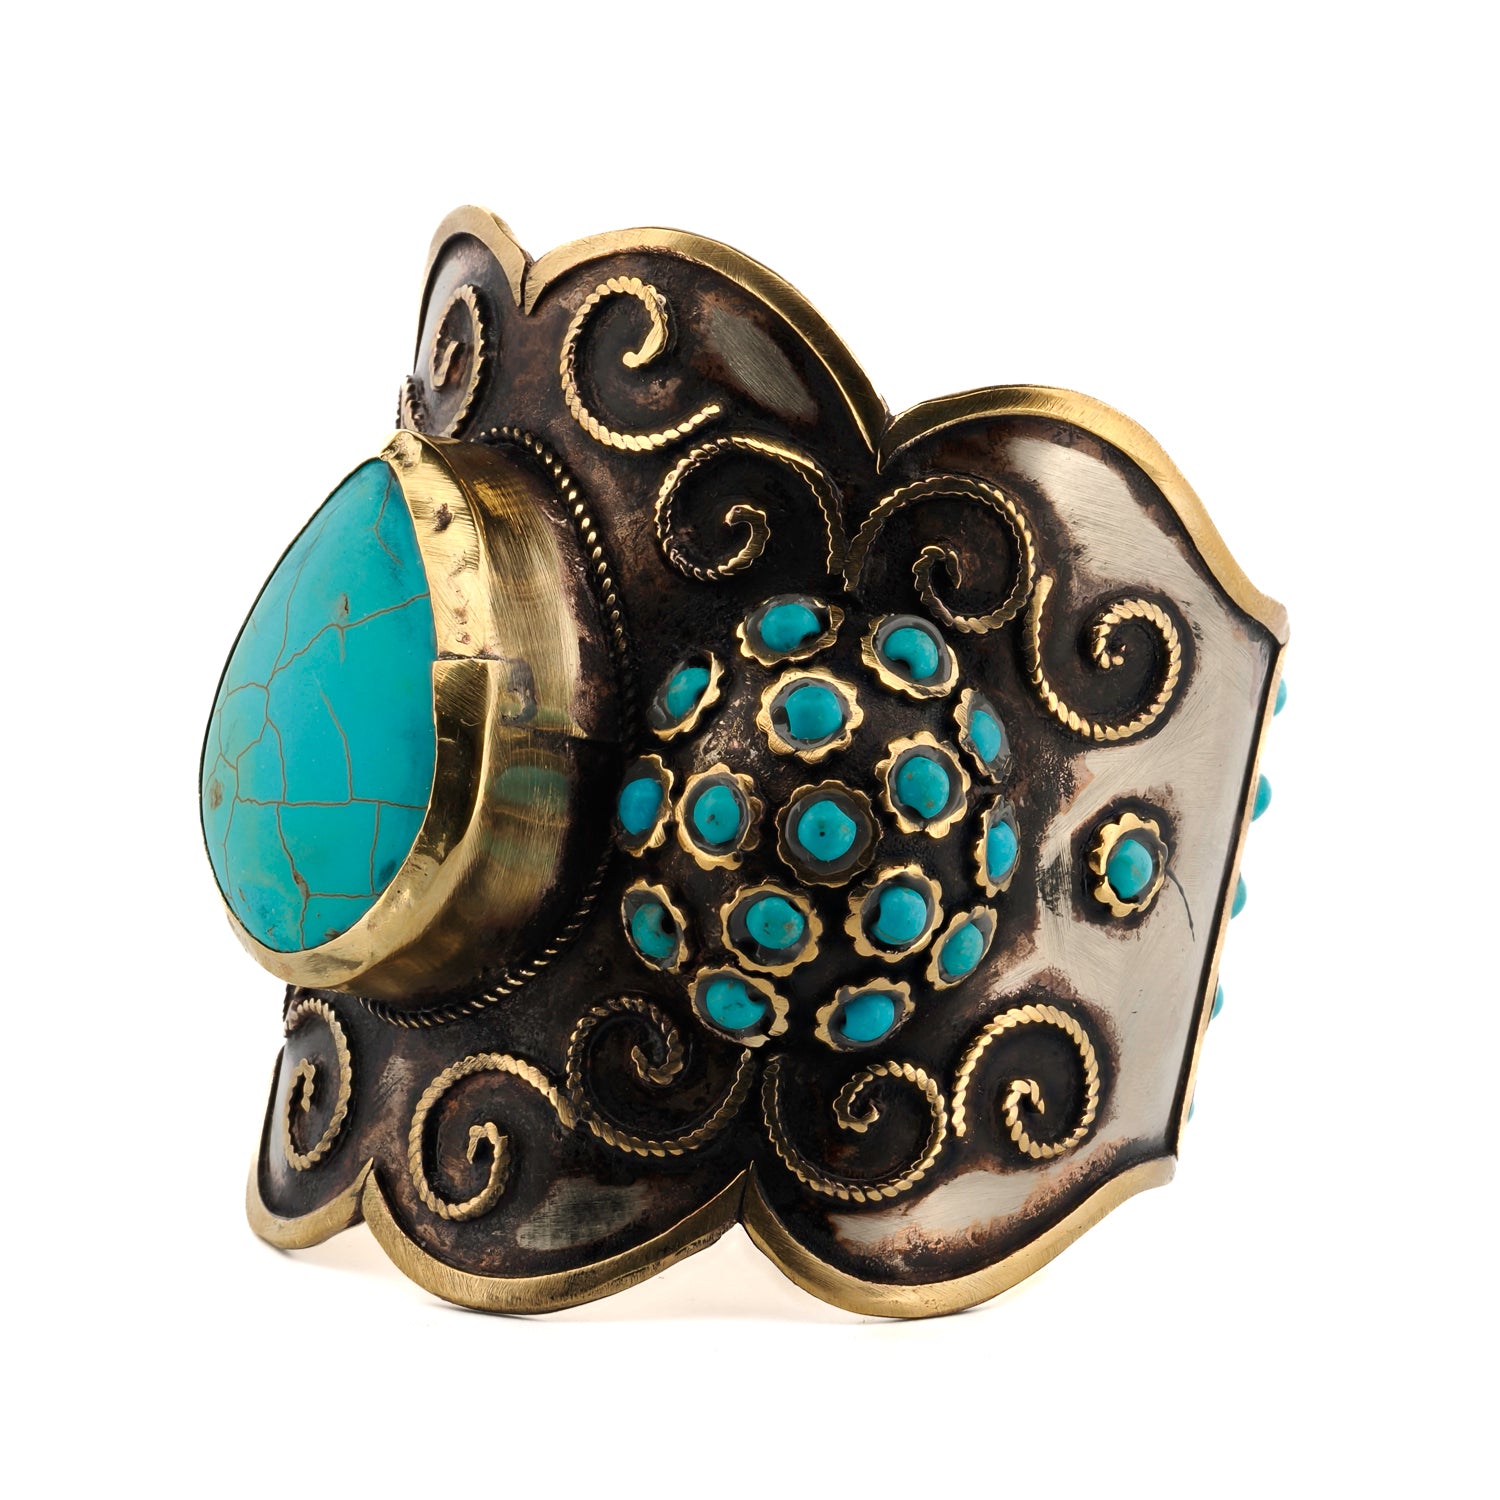 Luxurious gold-plated bracelet featuring a bold turquoise gemstone